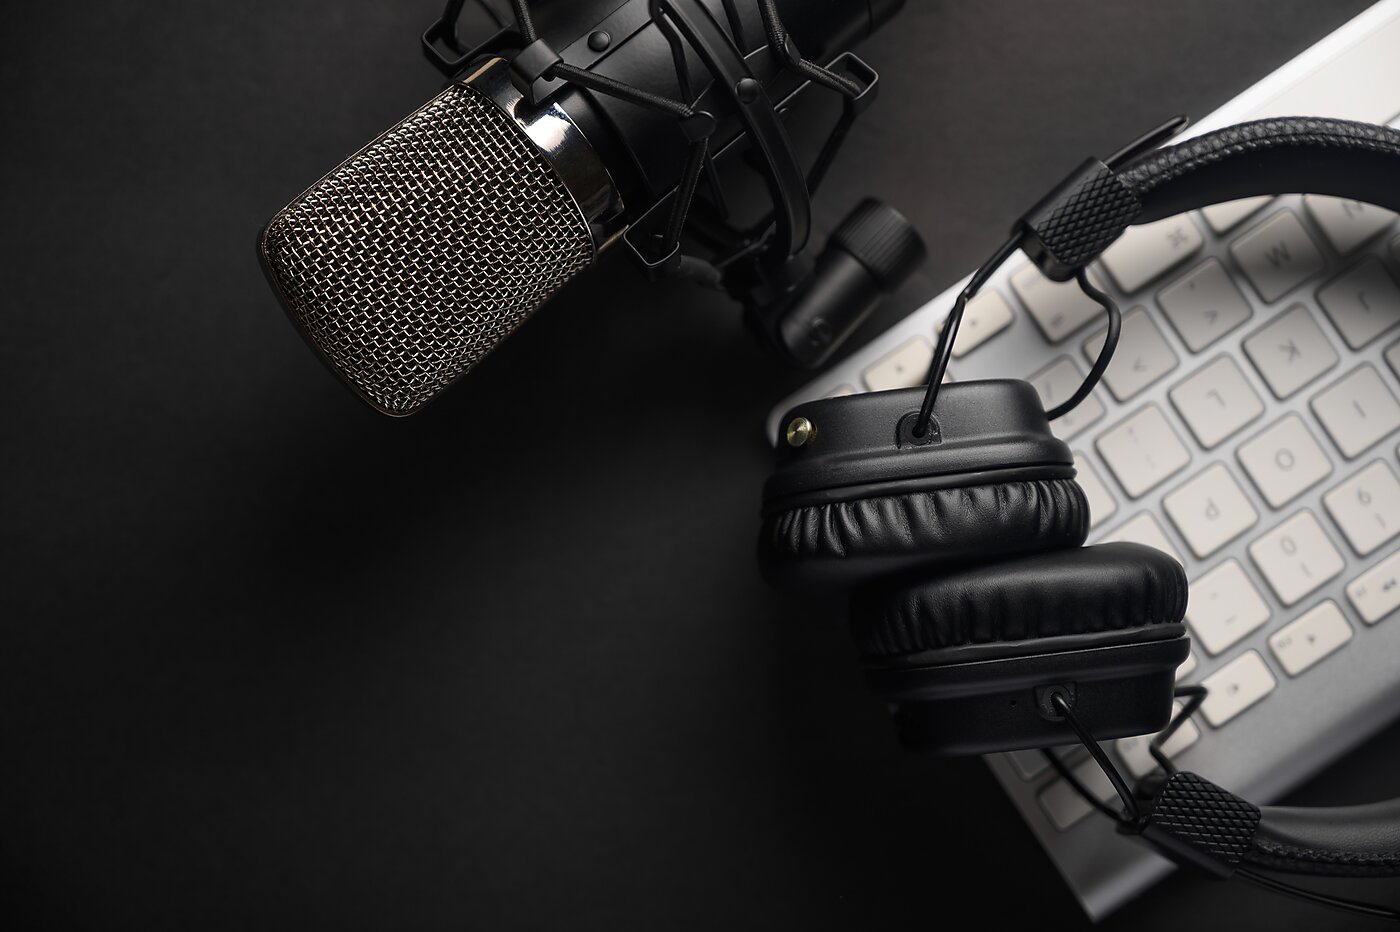 Podcast recording equipment on a desk